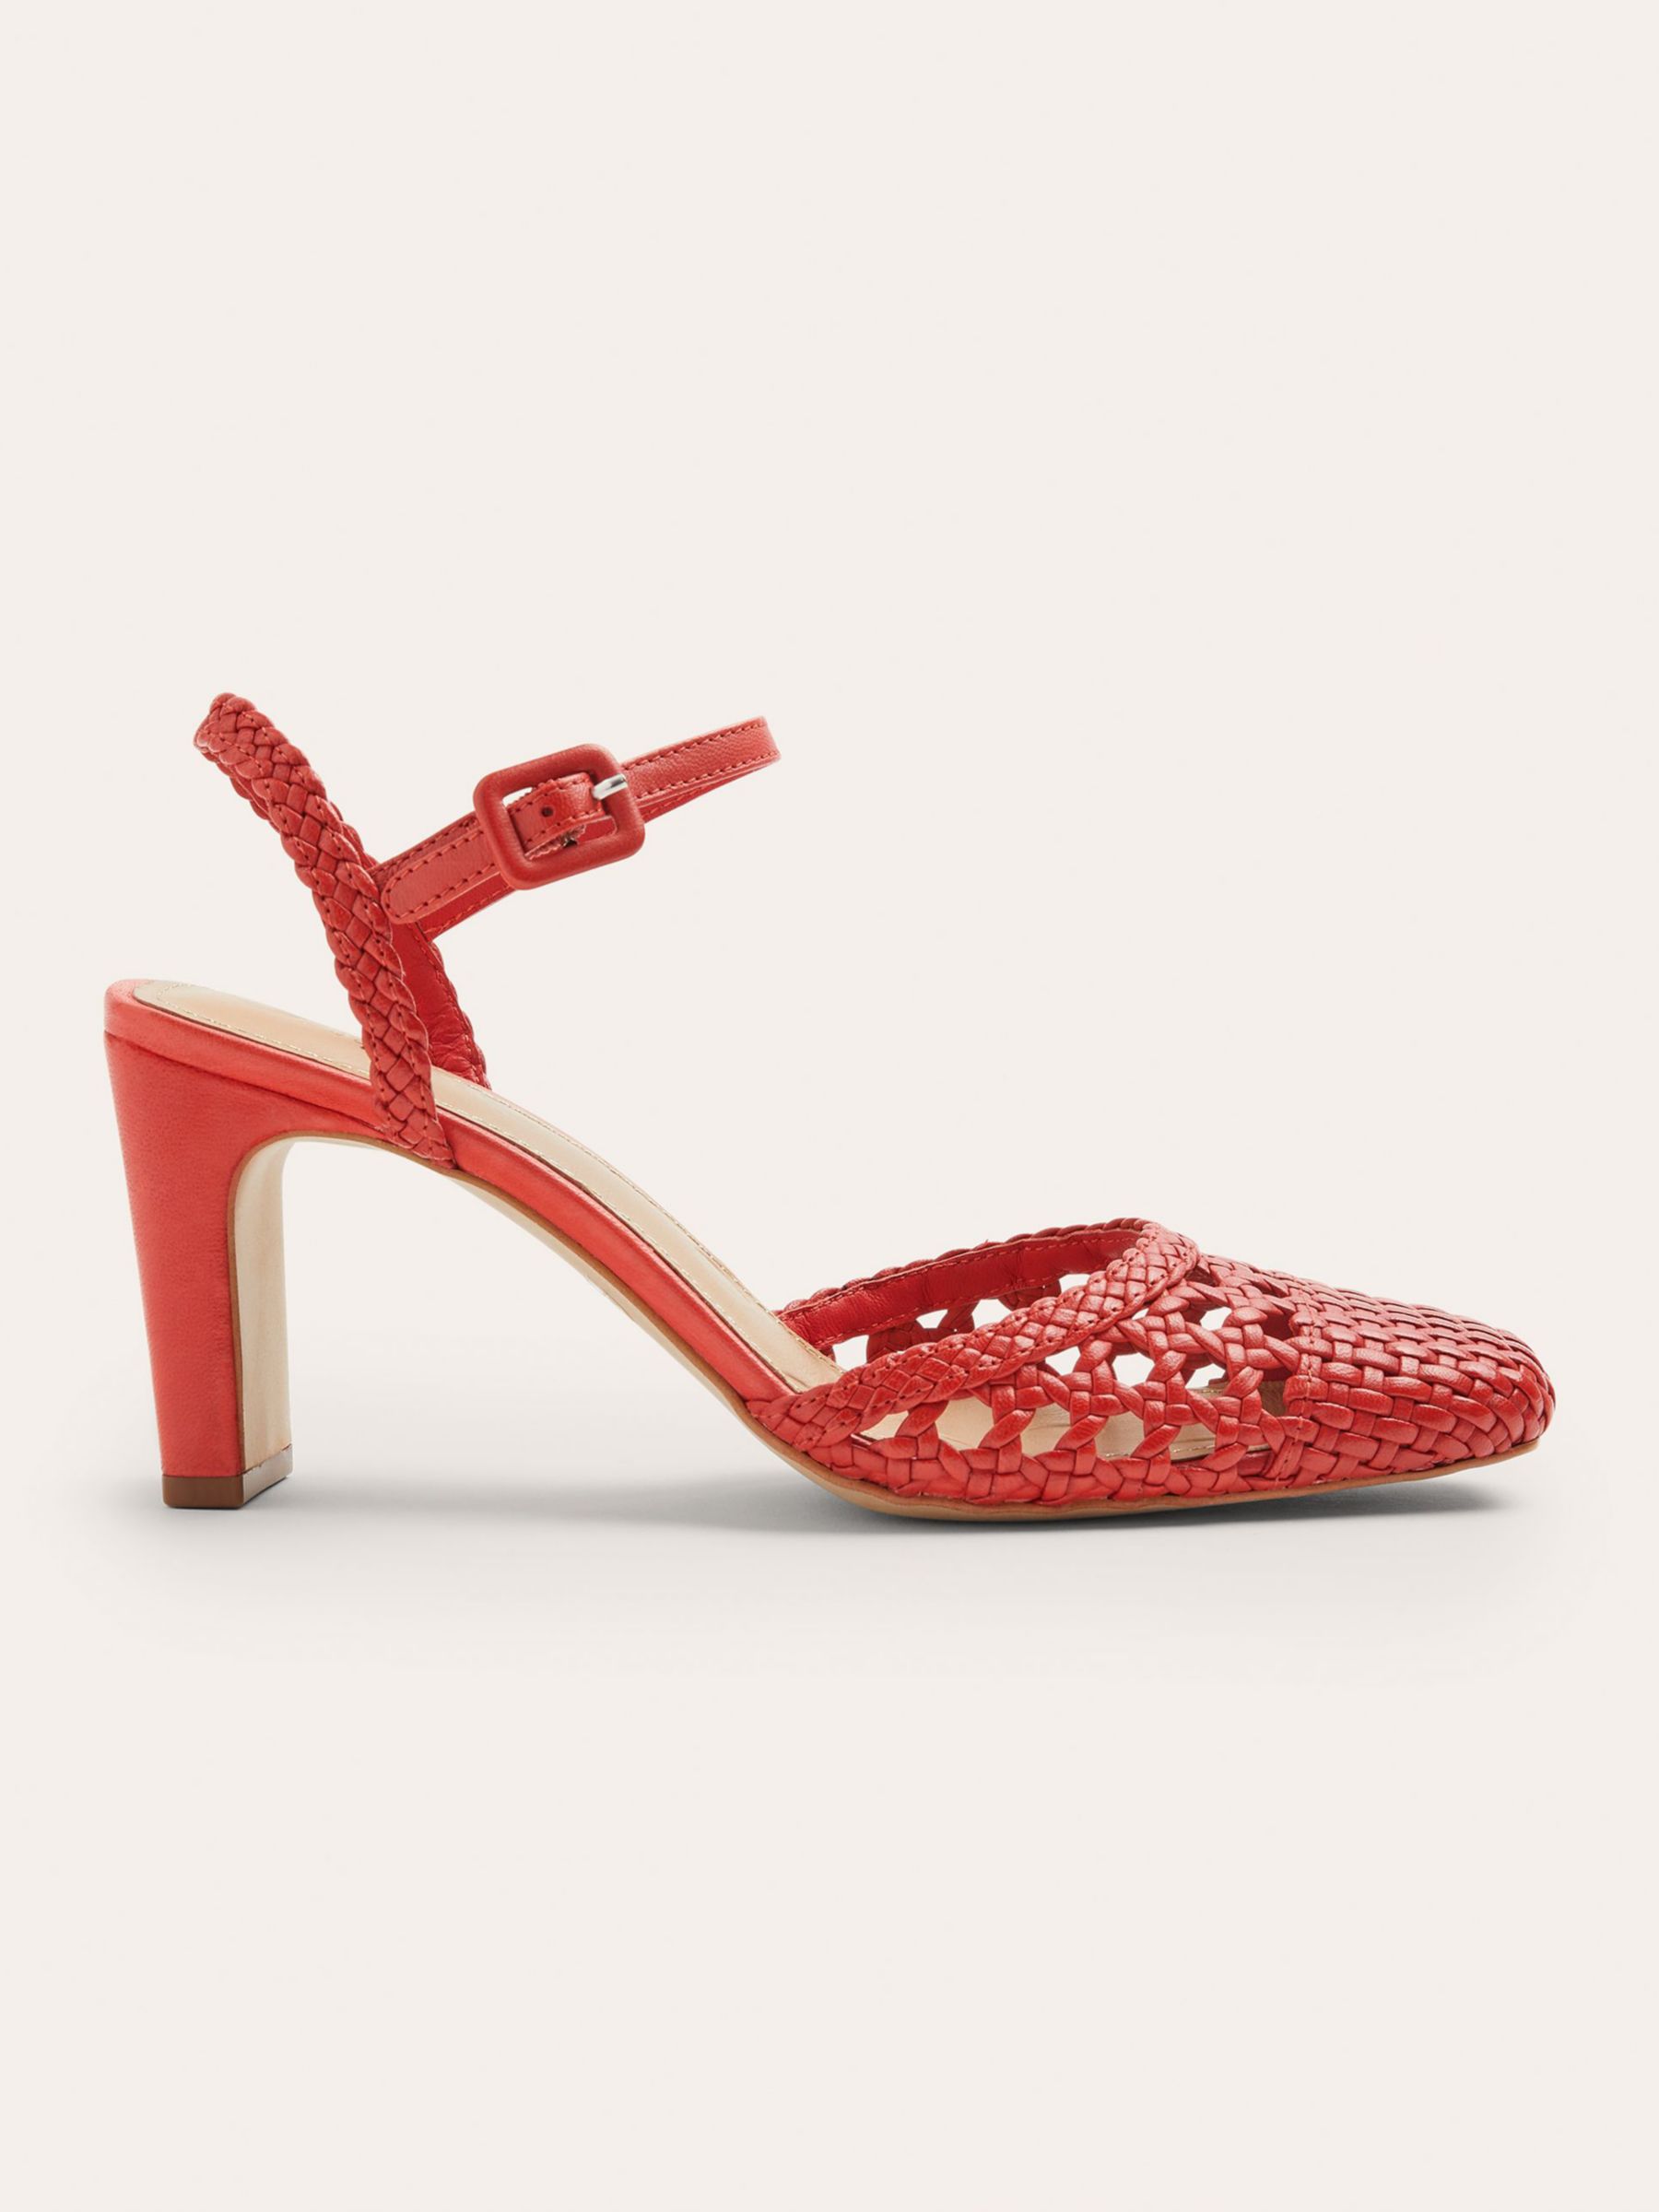 Boden Ellie Leather Woven Heels, Aurora Red at John Lewis & Partners